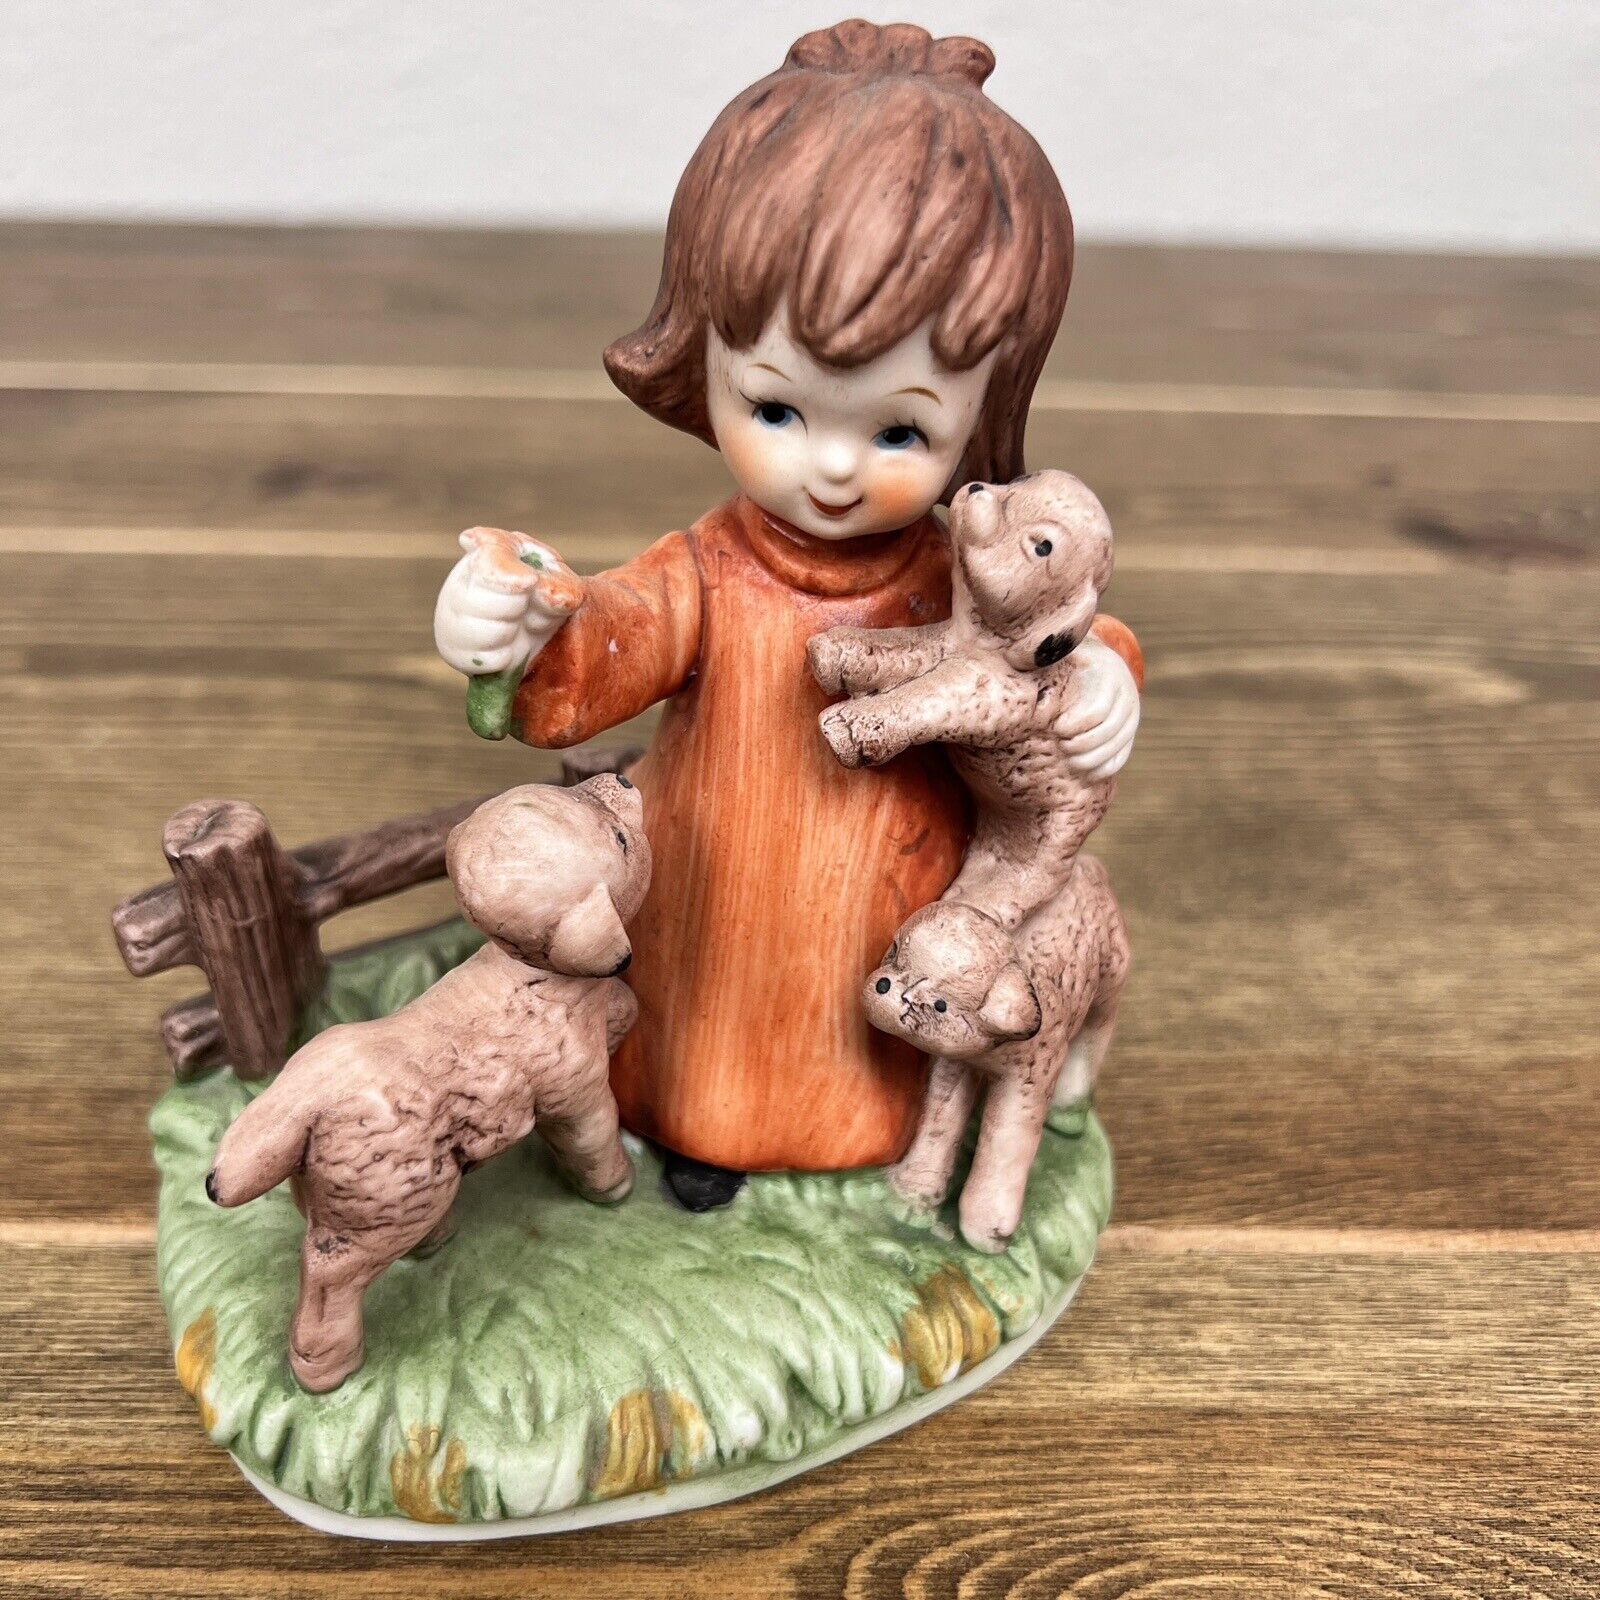 Vintage Little Girl with Lambs Figurine Home Decor